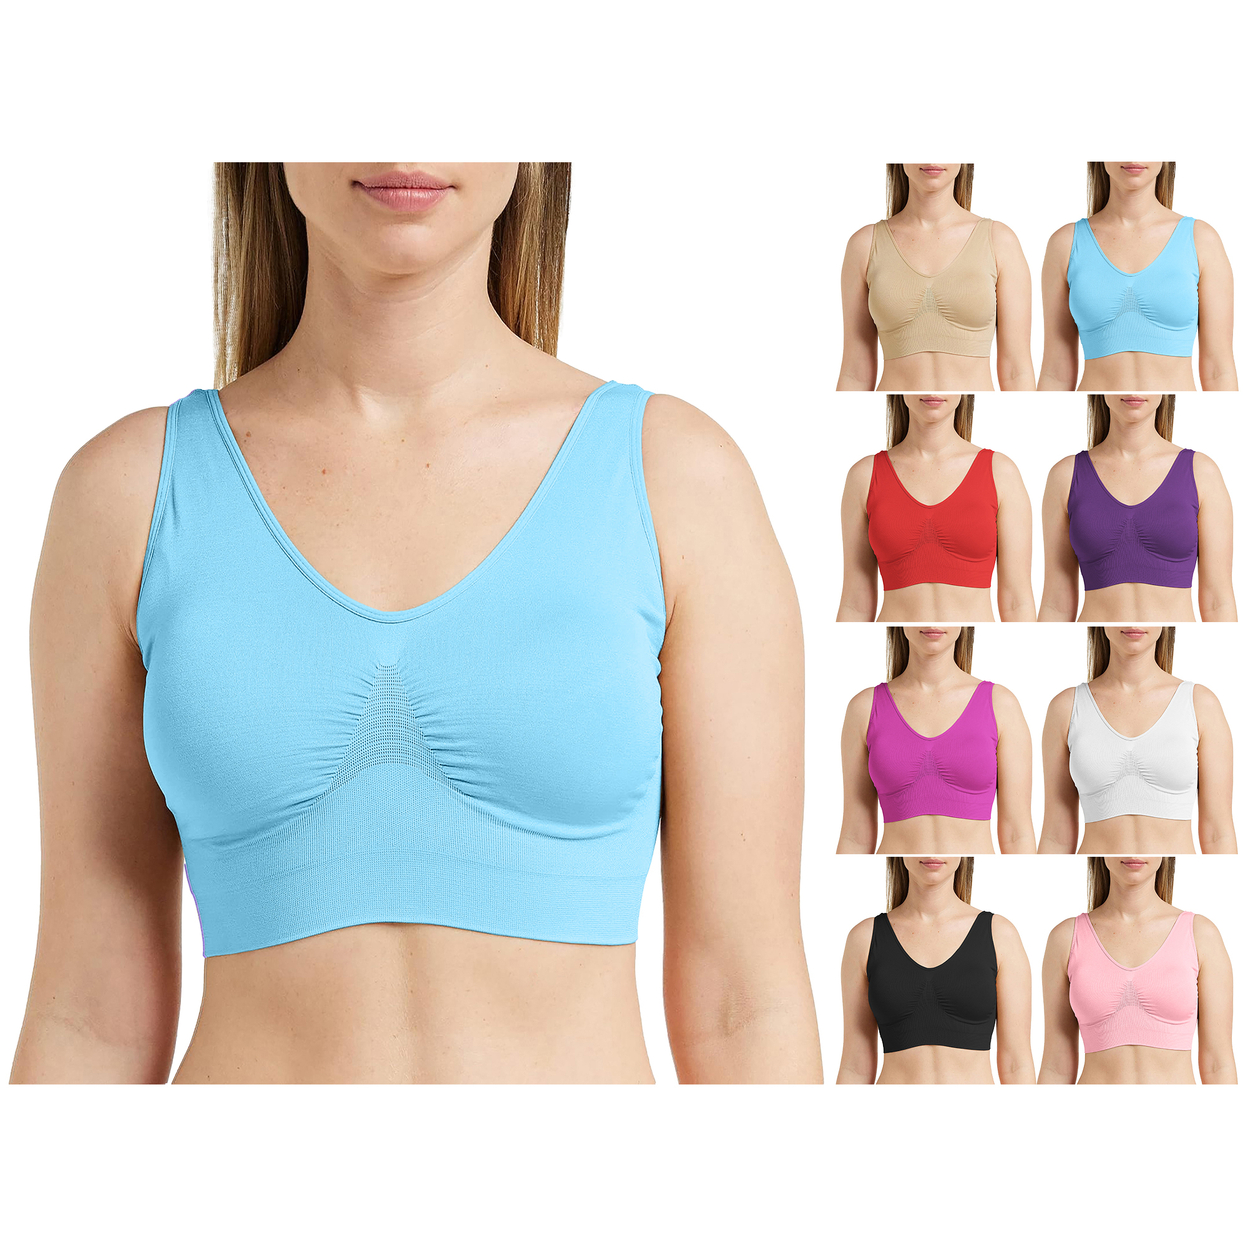 5-Pack: Women's Comfortable Scoopneck Stretch Seamless Yoga Workout Active Bra - Xx-large